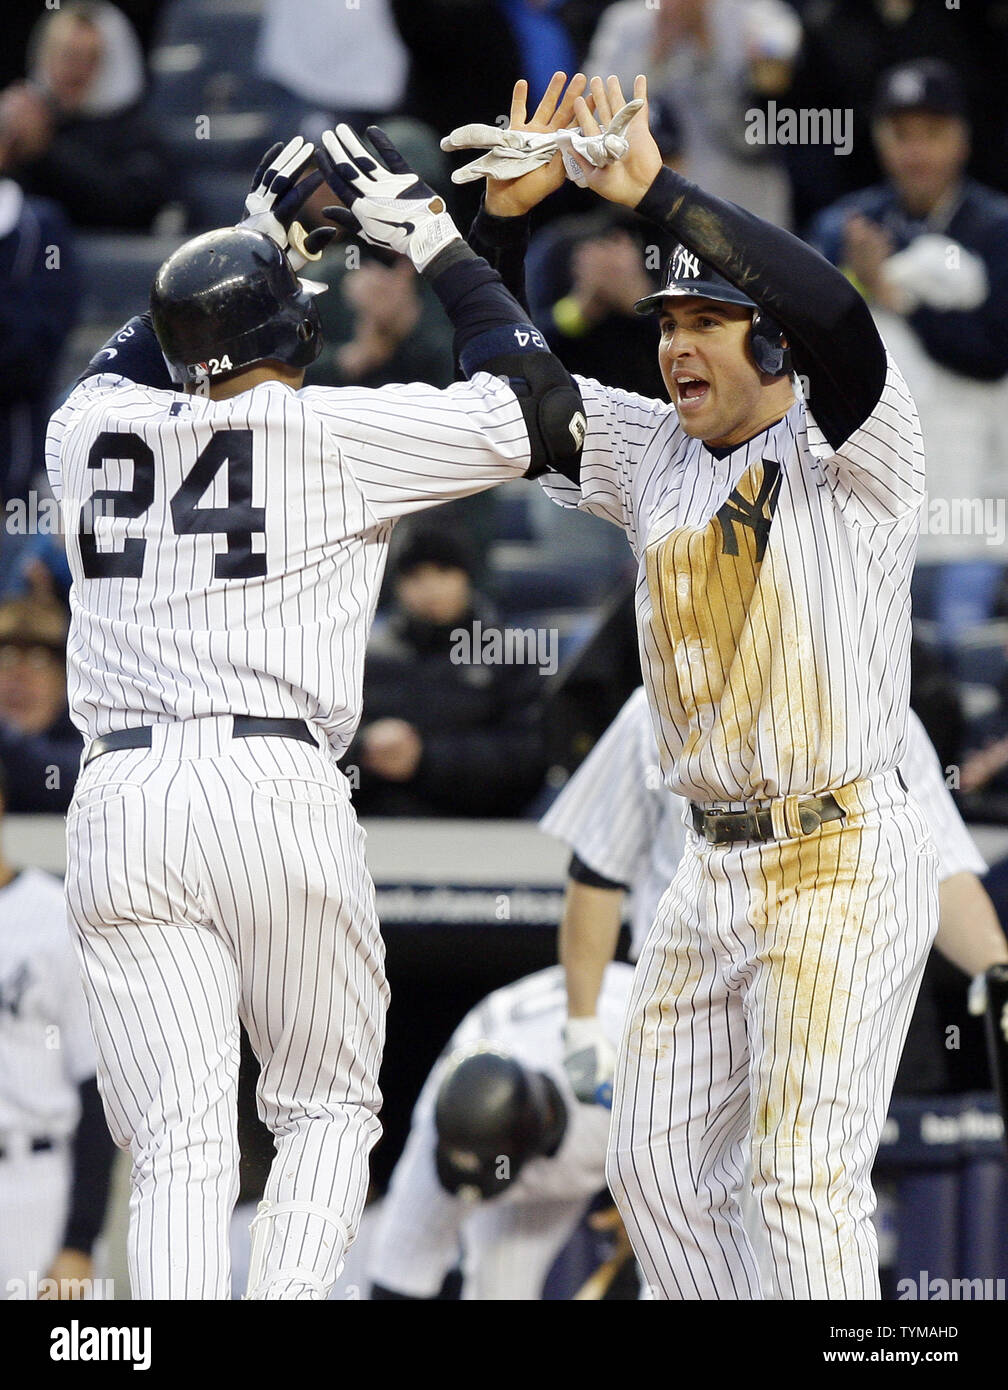 New York Yankees Robinson Cano and Mark Teixeira react at home plate after Cano hits a 2-run homer in the eighth inning against the Texas Rangers at Yankee Stadium in New York City on April 16, 2011.       UPI/John Angelillo Stock Photo